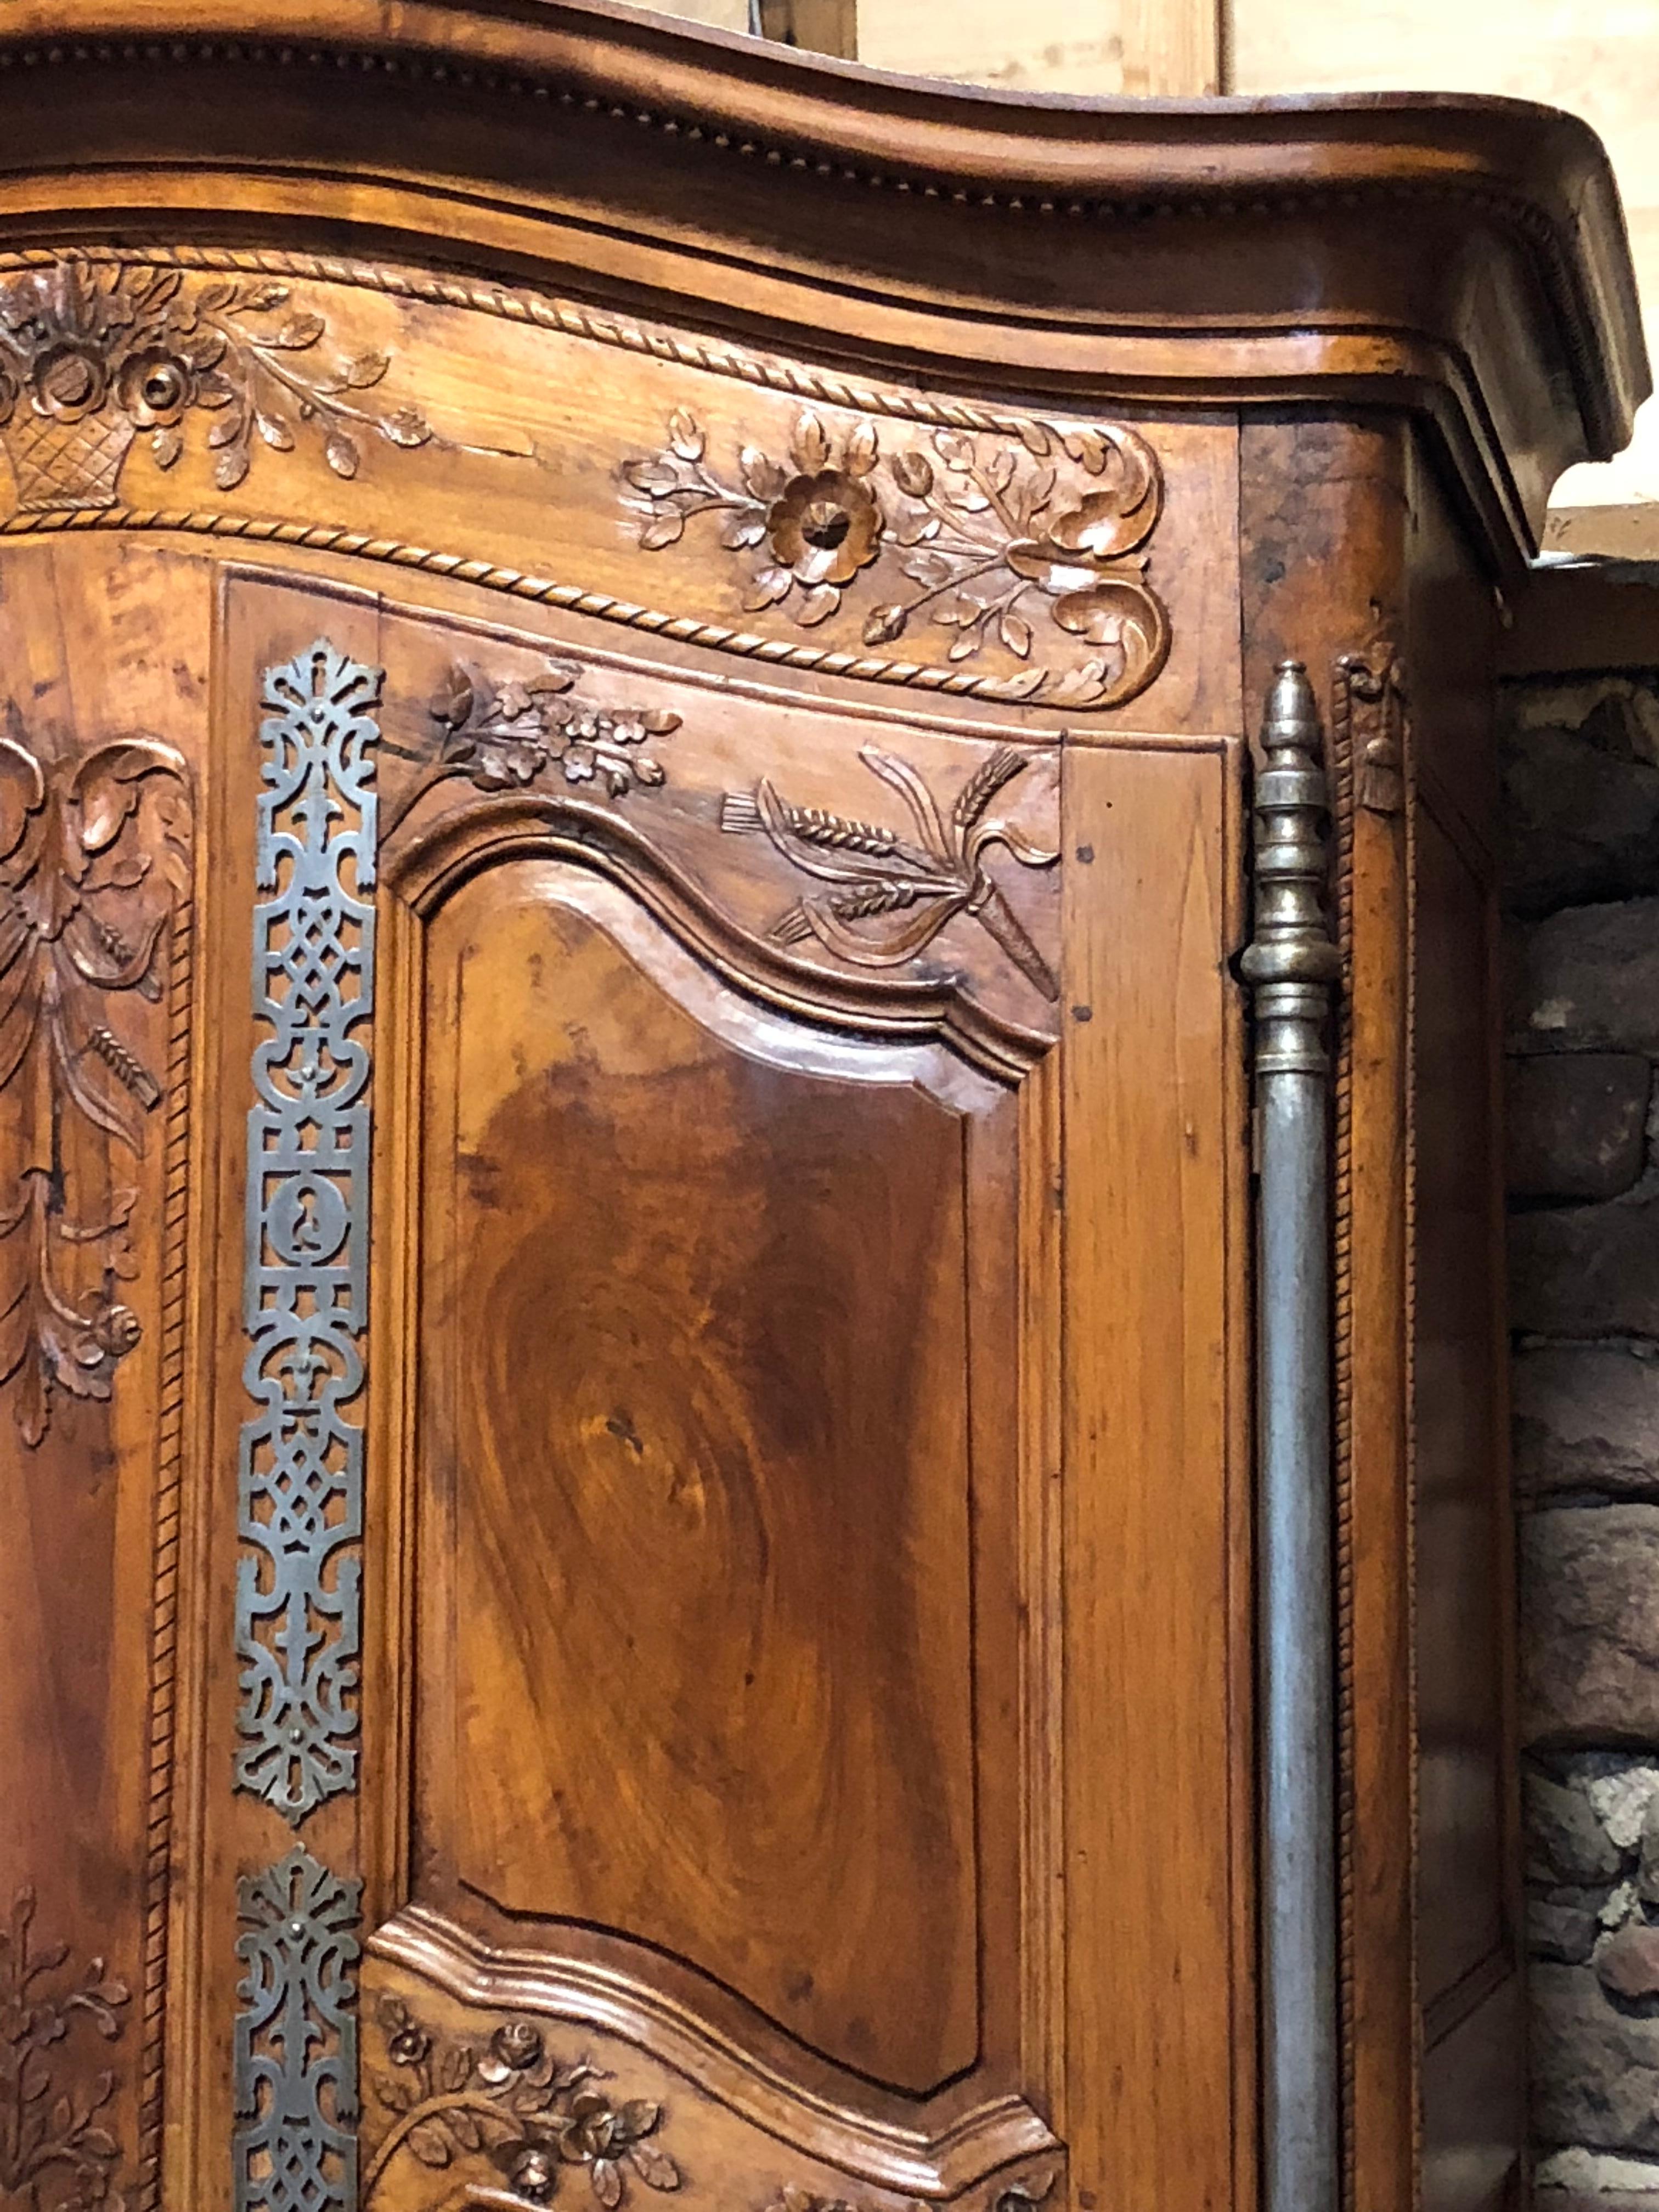 A museum quality Provencale Louis XV wedding armoire in walnut with beautifully carved and paneled doors, a chapeau gendarme cornice, great iron hardware, and carved cabriole legs. The armoire was part of a private collection assembled by the two